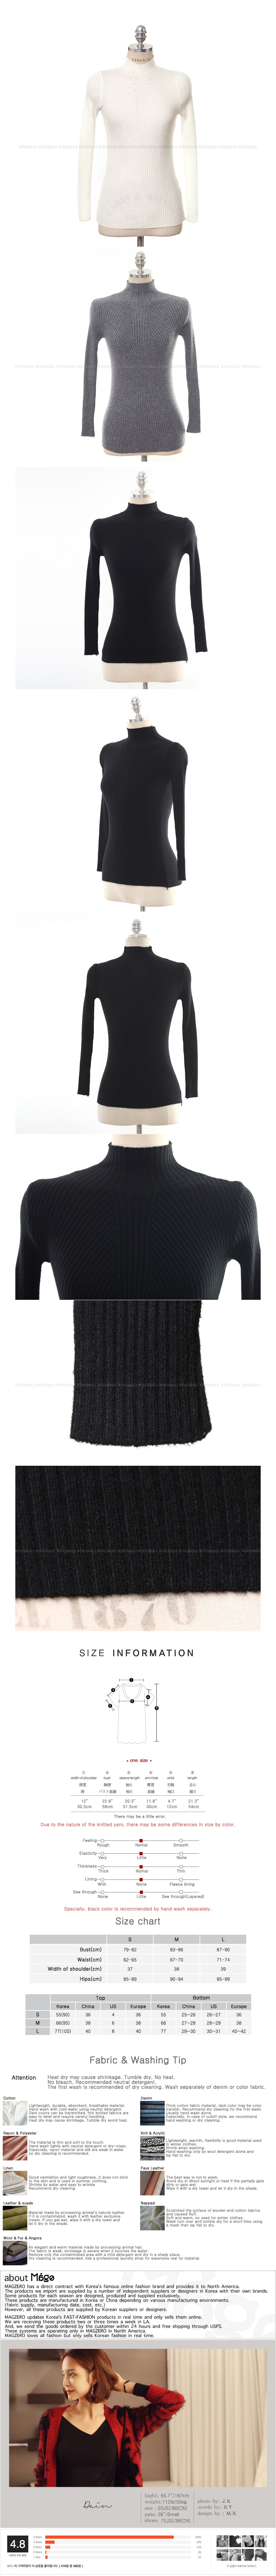 KOREA Mock Neck Stretchy Ribbed Knit Top Black One Size(S-M) [Free Shipping]